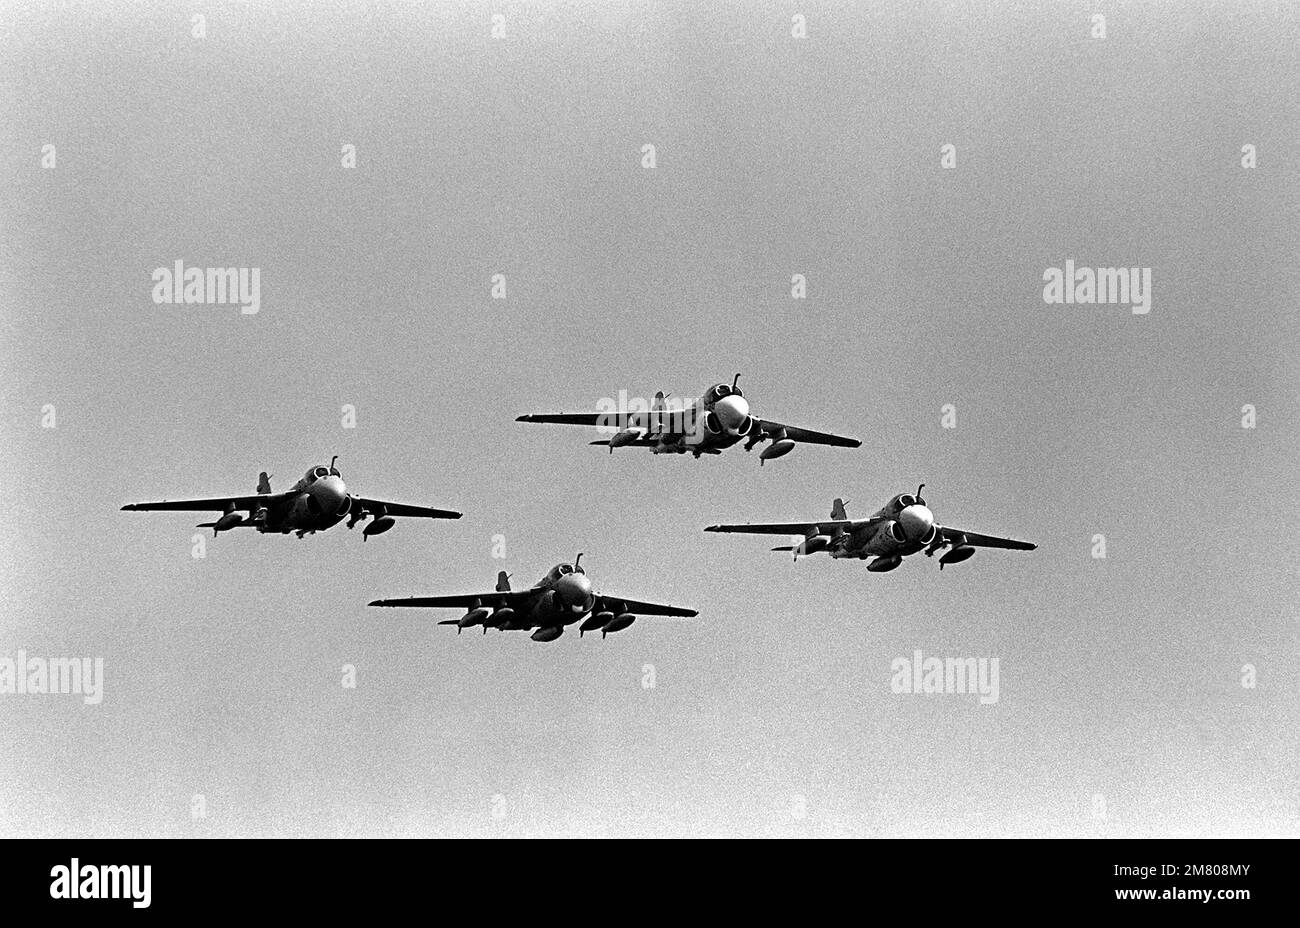 Four A-6E Intruder aircraft fly in formation as part of an aerial demonstration put on during Vice President George Bush's visit to the aircraft carrier USS RANGER (CV-61). Country: Pacific Ocean (POC) Stock Photo